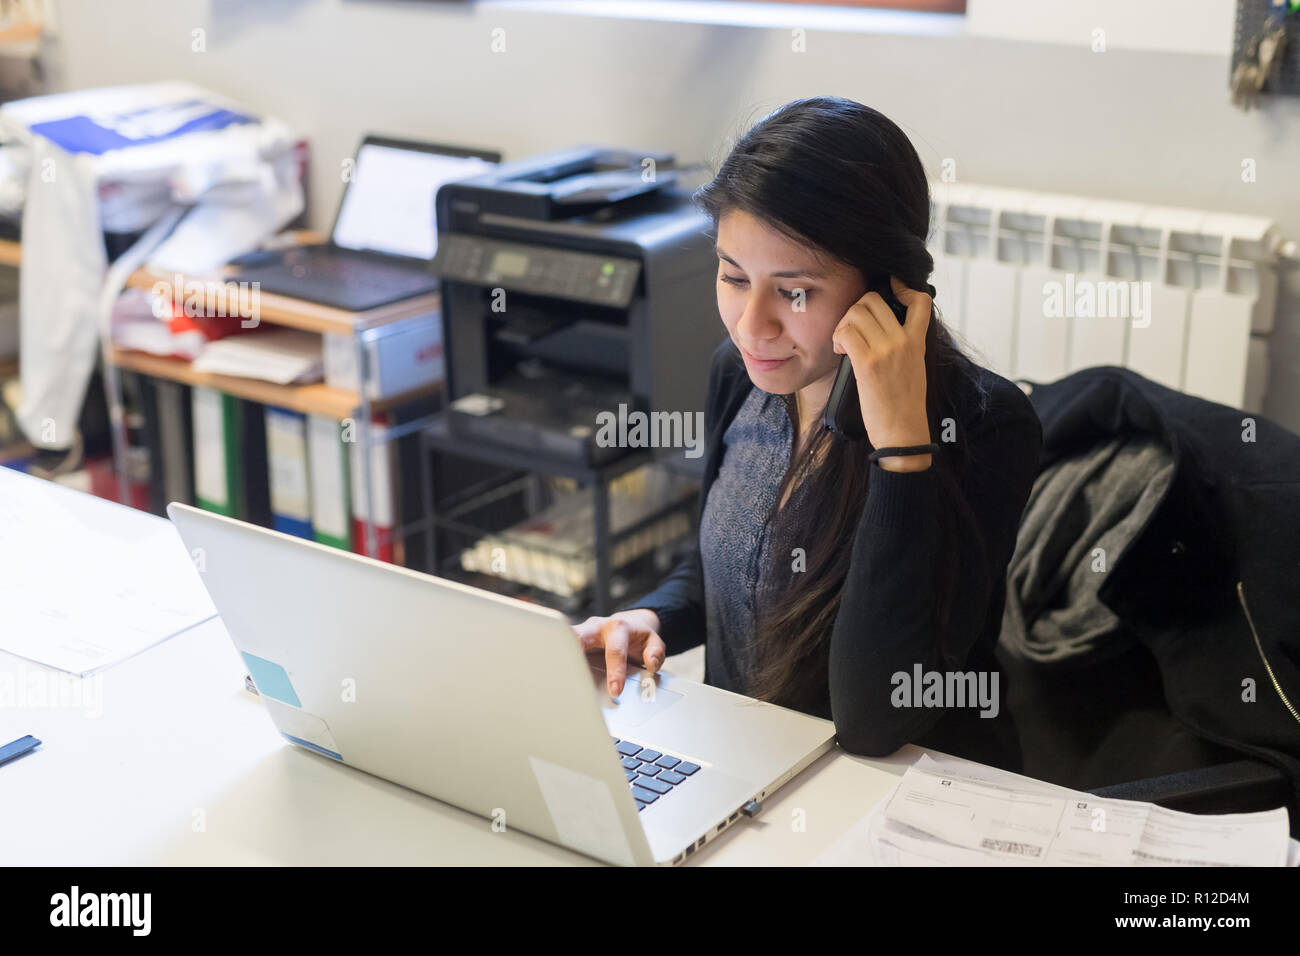 Woman using laptop and telephone in office Stock Photo